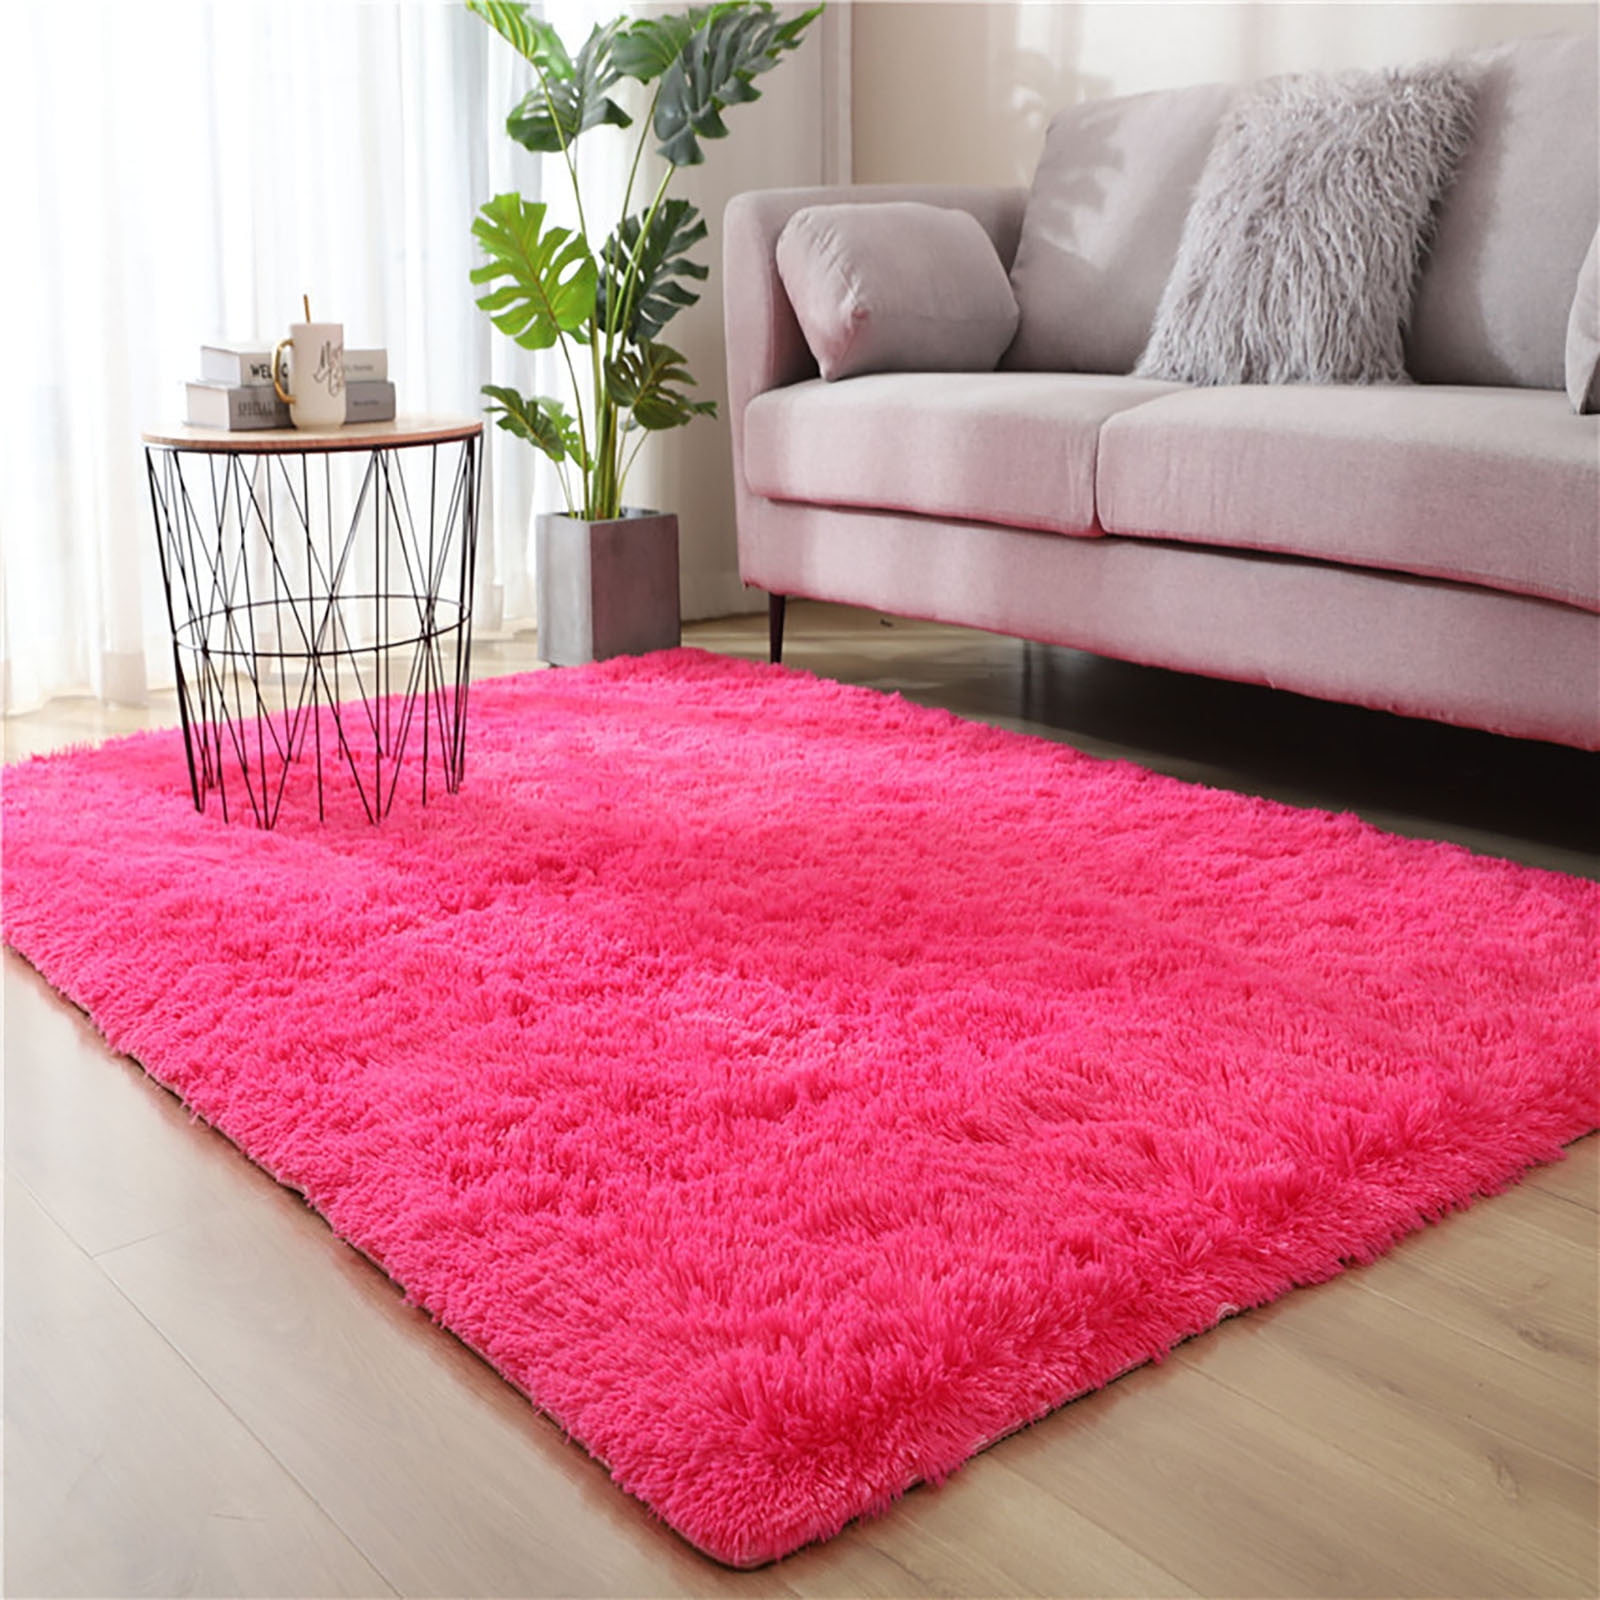  Moynesa Ultra-Thin Pink Area Rug - 9x12 Large Bedroom Rugs for  Living Room Non-Slip Non-Shedding Dining Room Mat, Vintage Indoor Floor  Carpet for Gift Girls Nursery Playroom Office : Home 